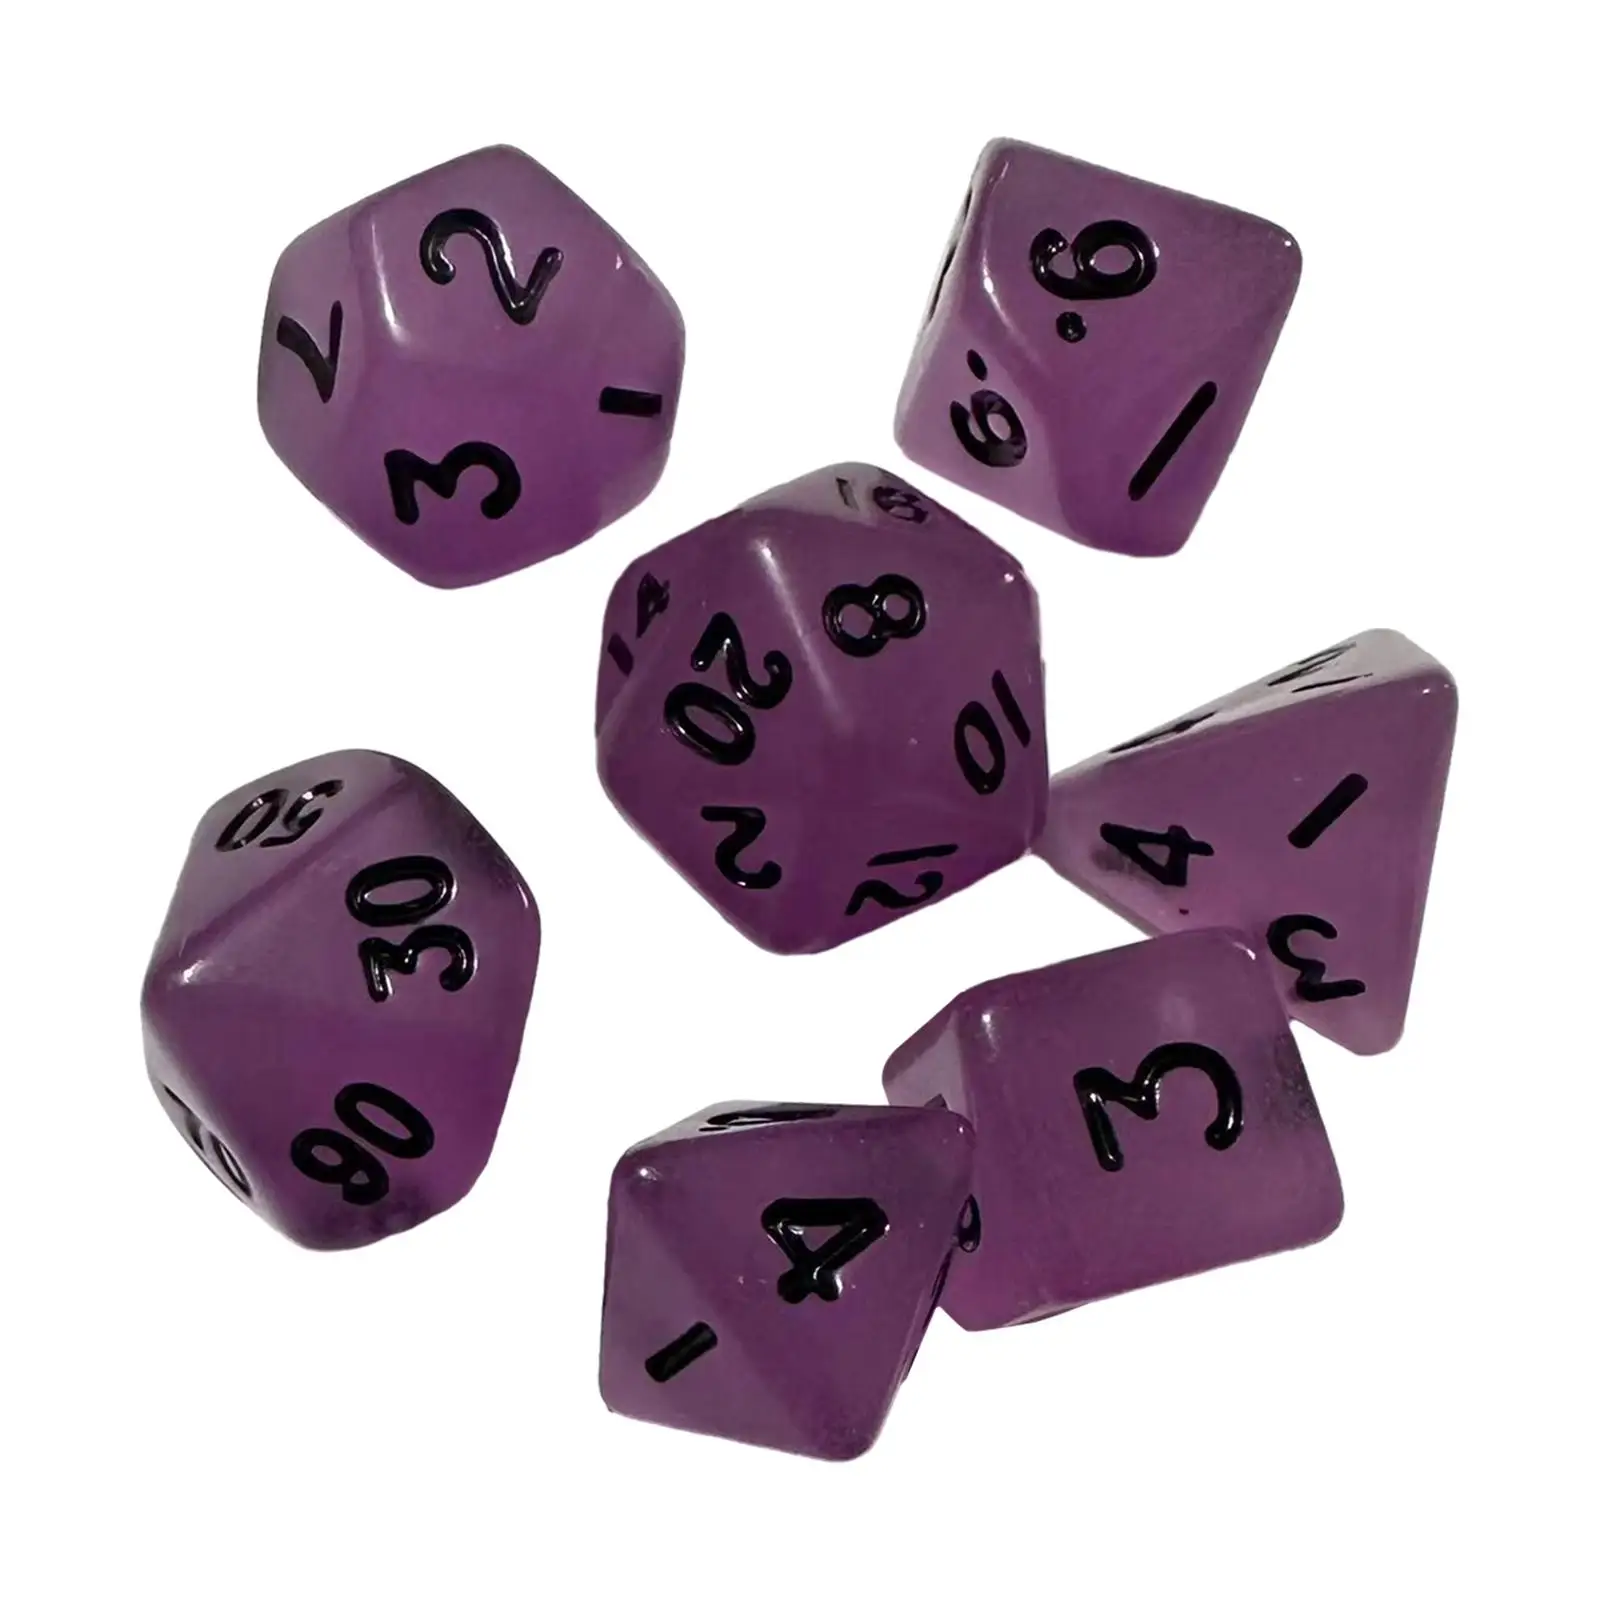 7Pcs Glowing in Dark Dices D4-d20 Polyhedral Dices Set for Role Playing Game